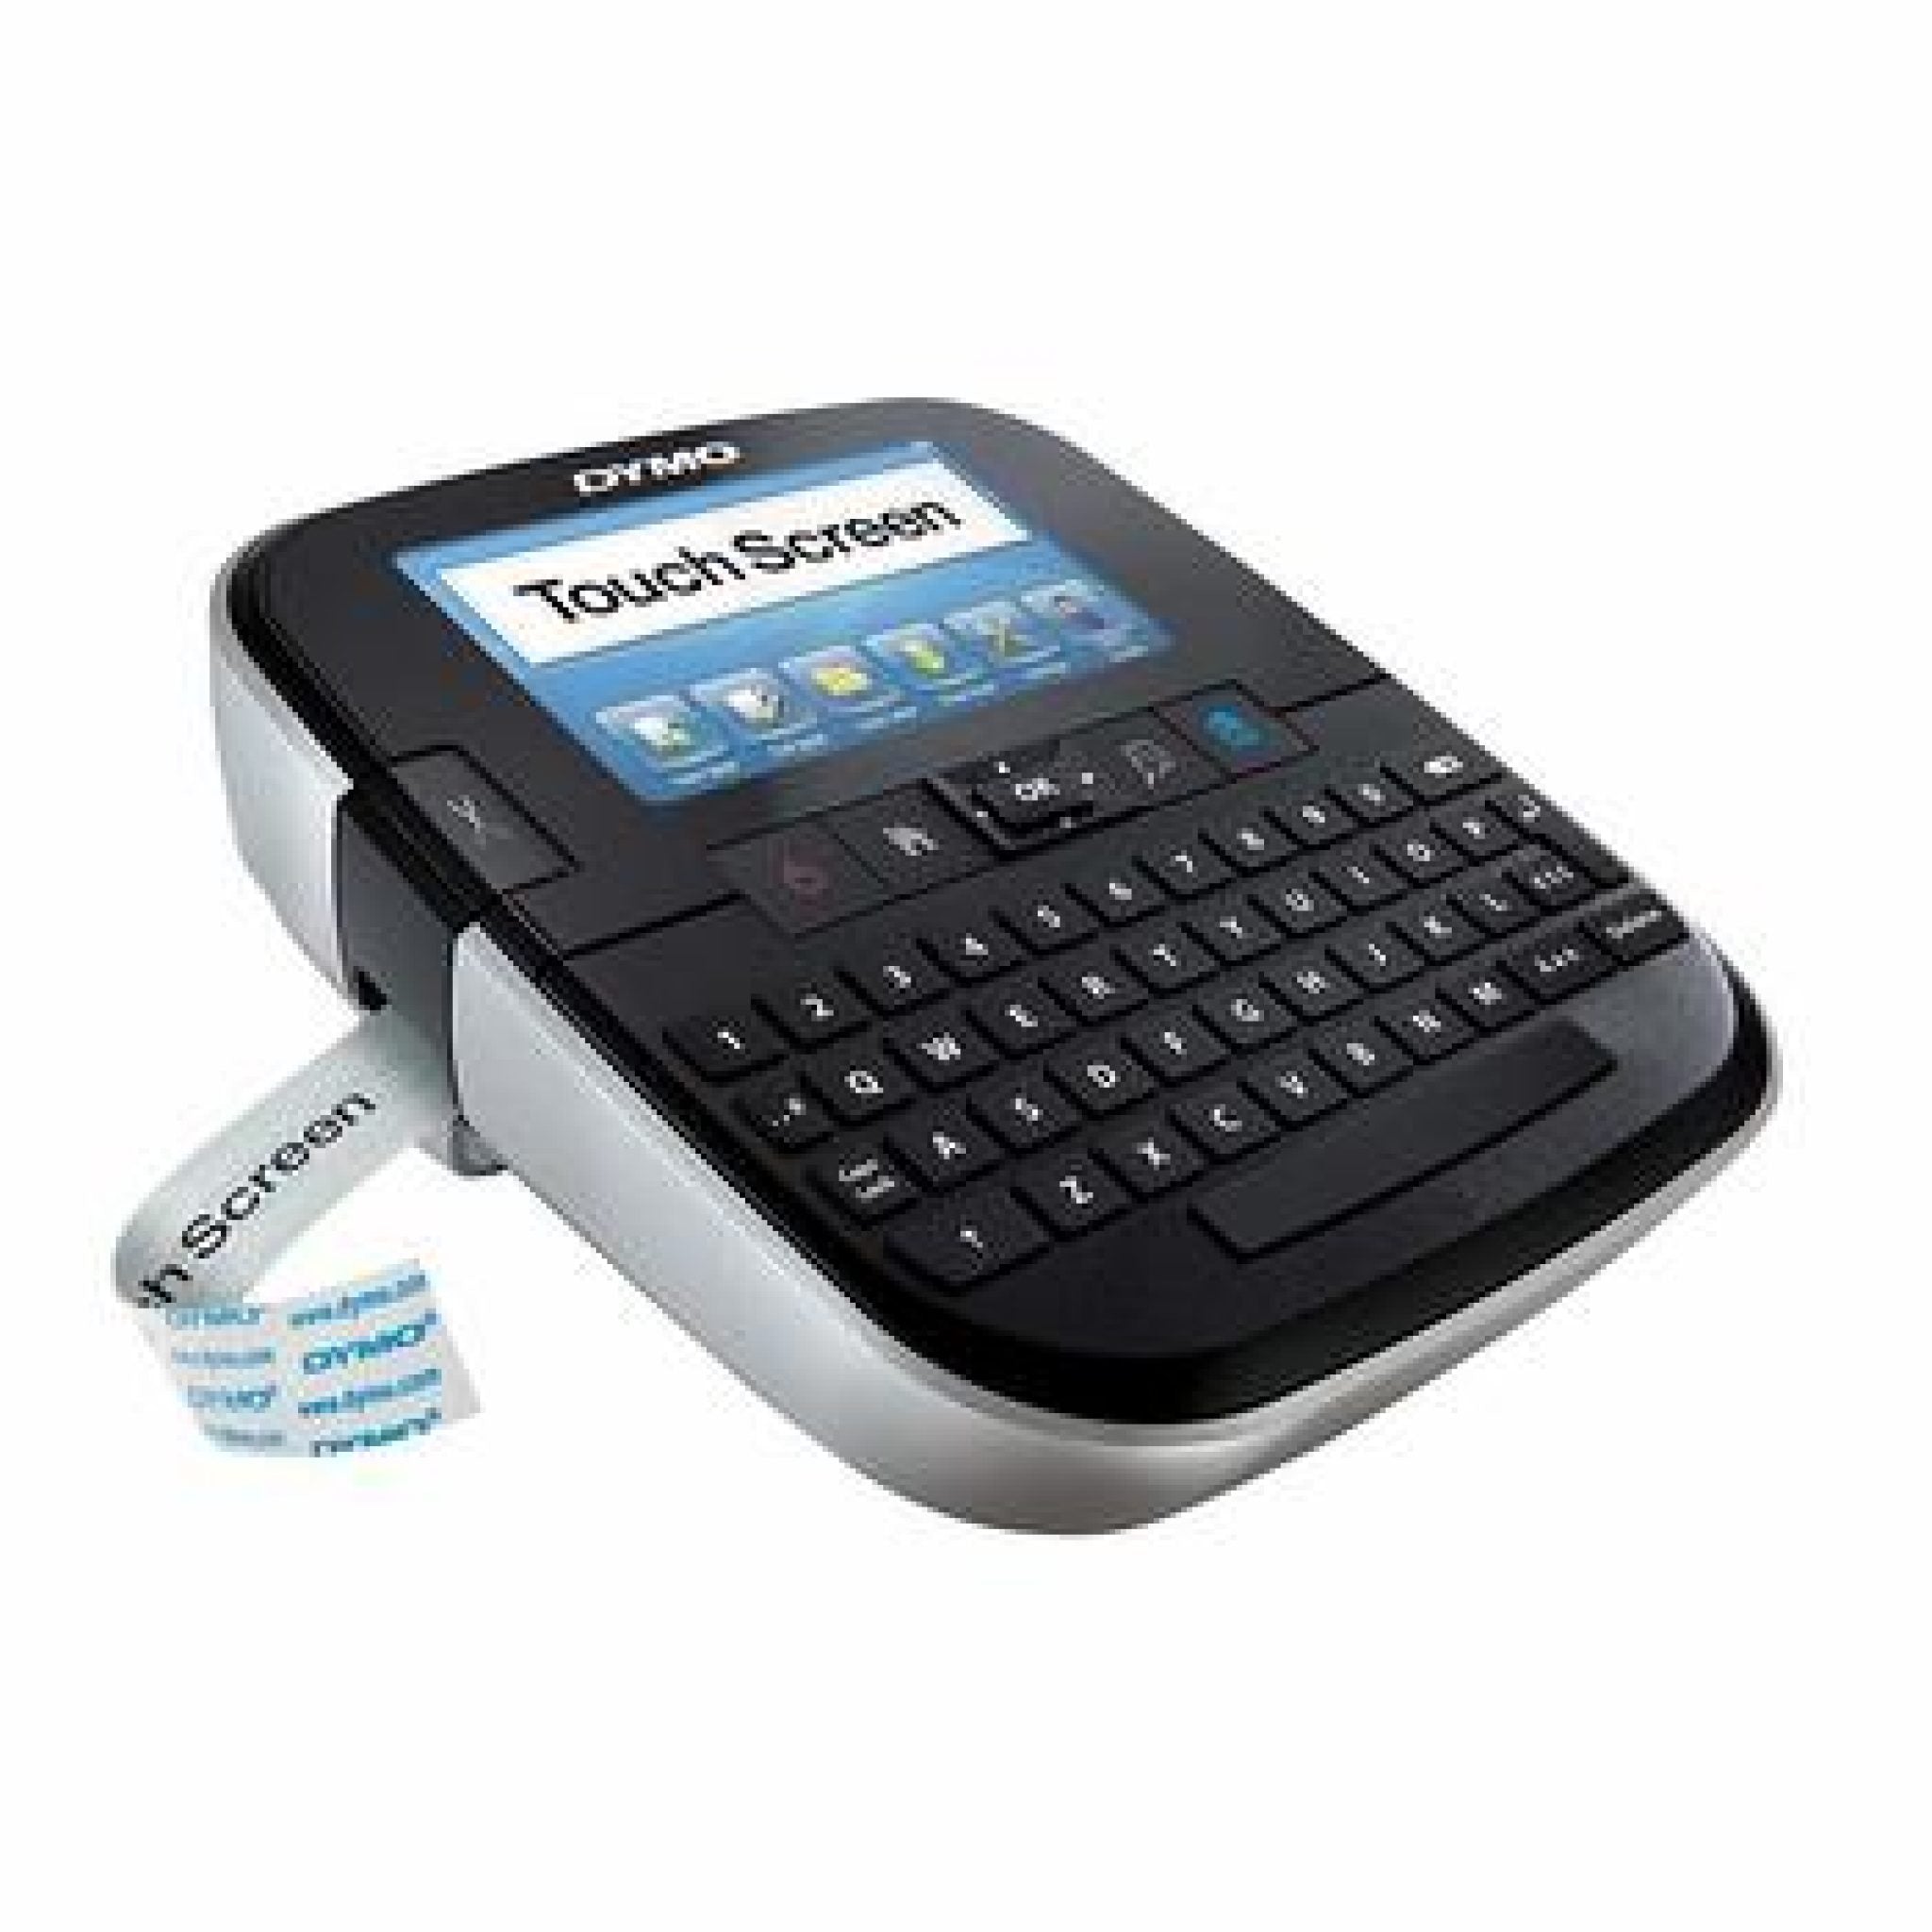 6 Greatest Label Makers: Make Things Organized!